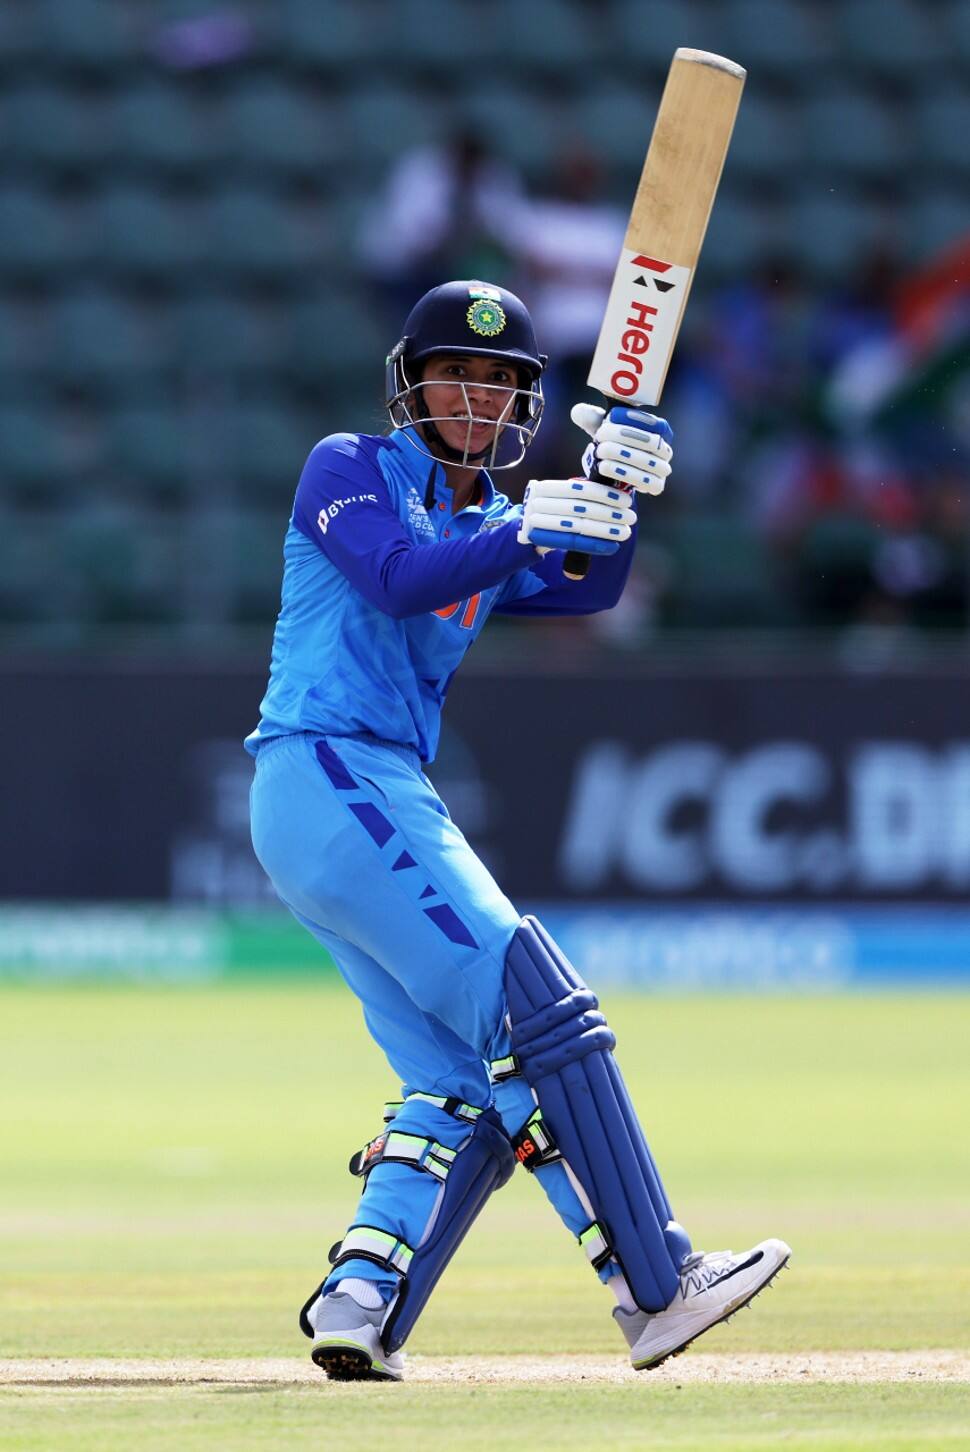 In January 2022, the ICC awarded Smriti Mandhana with the Rachael Heyhoe-Flint Award for the ICC Women's Cricketer of the Year. (Source: Twitter)